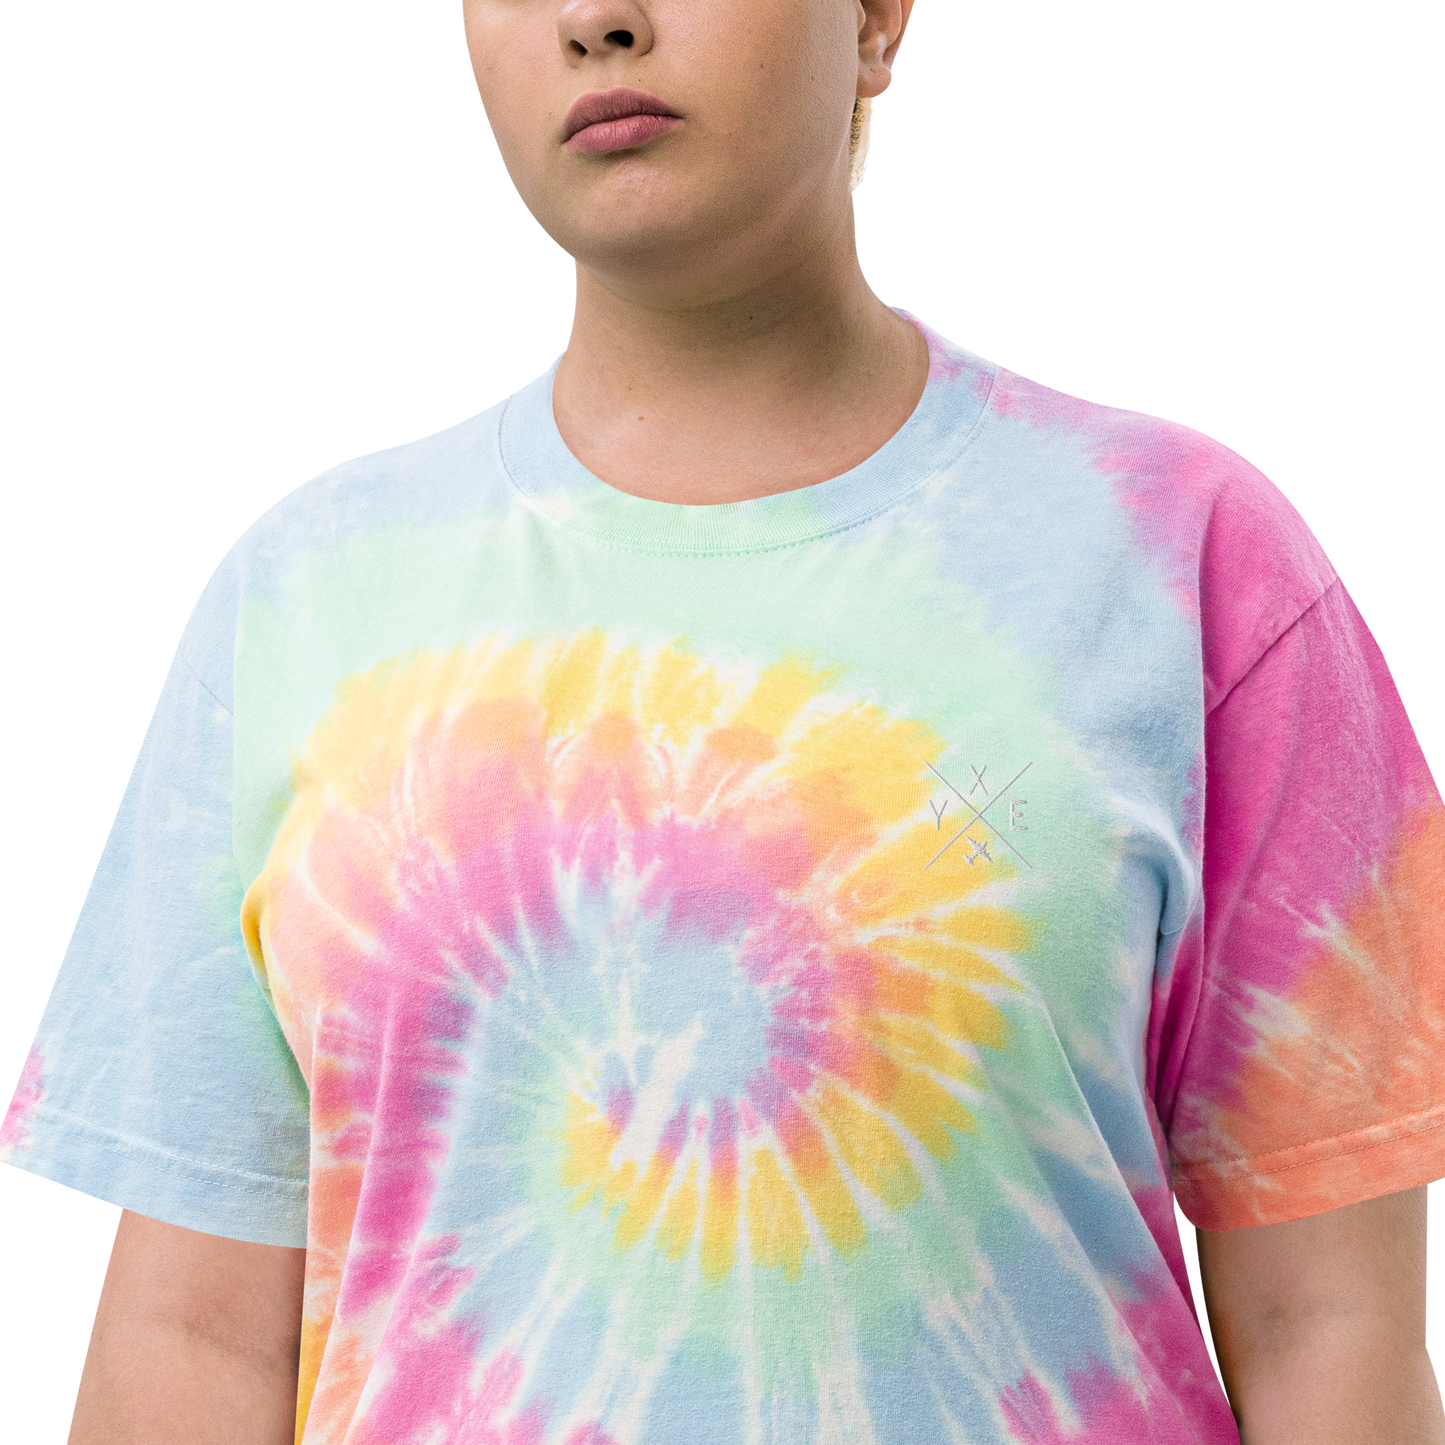 YHM Designs - YXE Saskatoon Oversized Tie-Dye T-Shirt - Crossed-X Design with Airport Code and Vintage Propliner - White Embroidery - Image 13